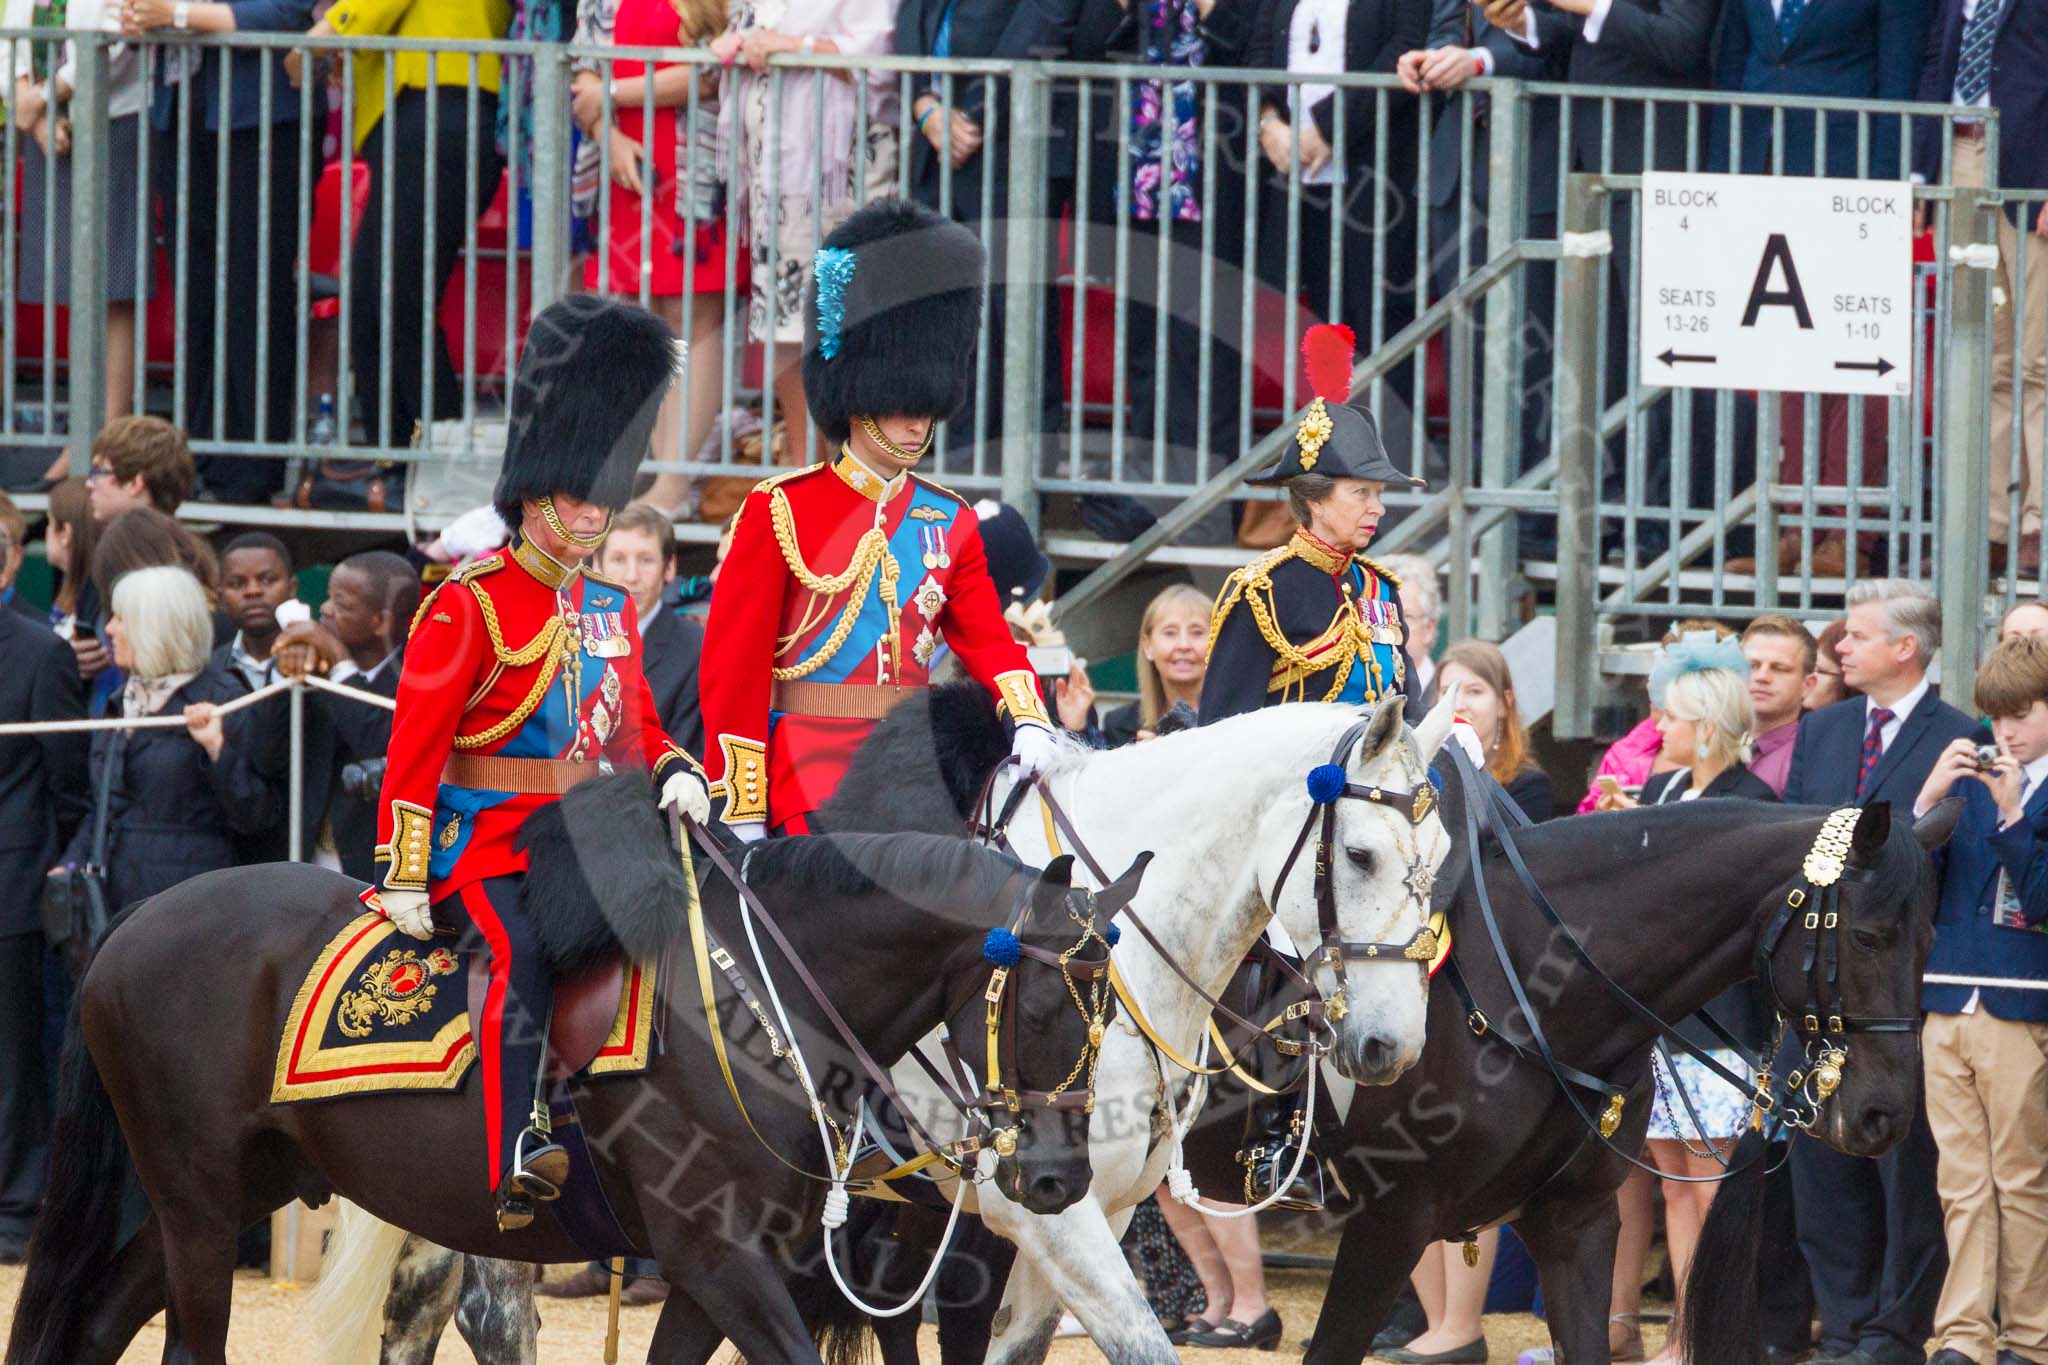 Trooping the Colour 2015. Image #240, 13 June 2015 10:58 Horse Guards Parade, London, UK